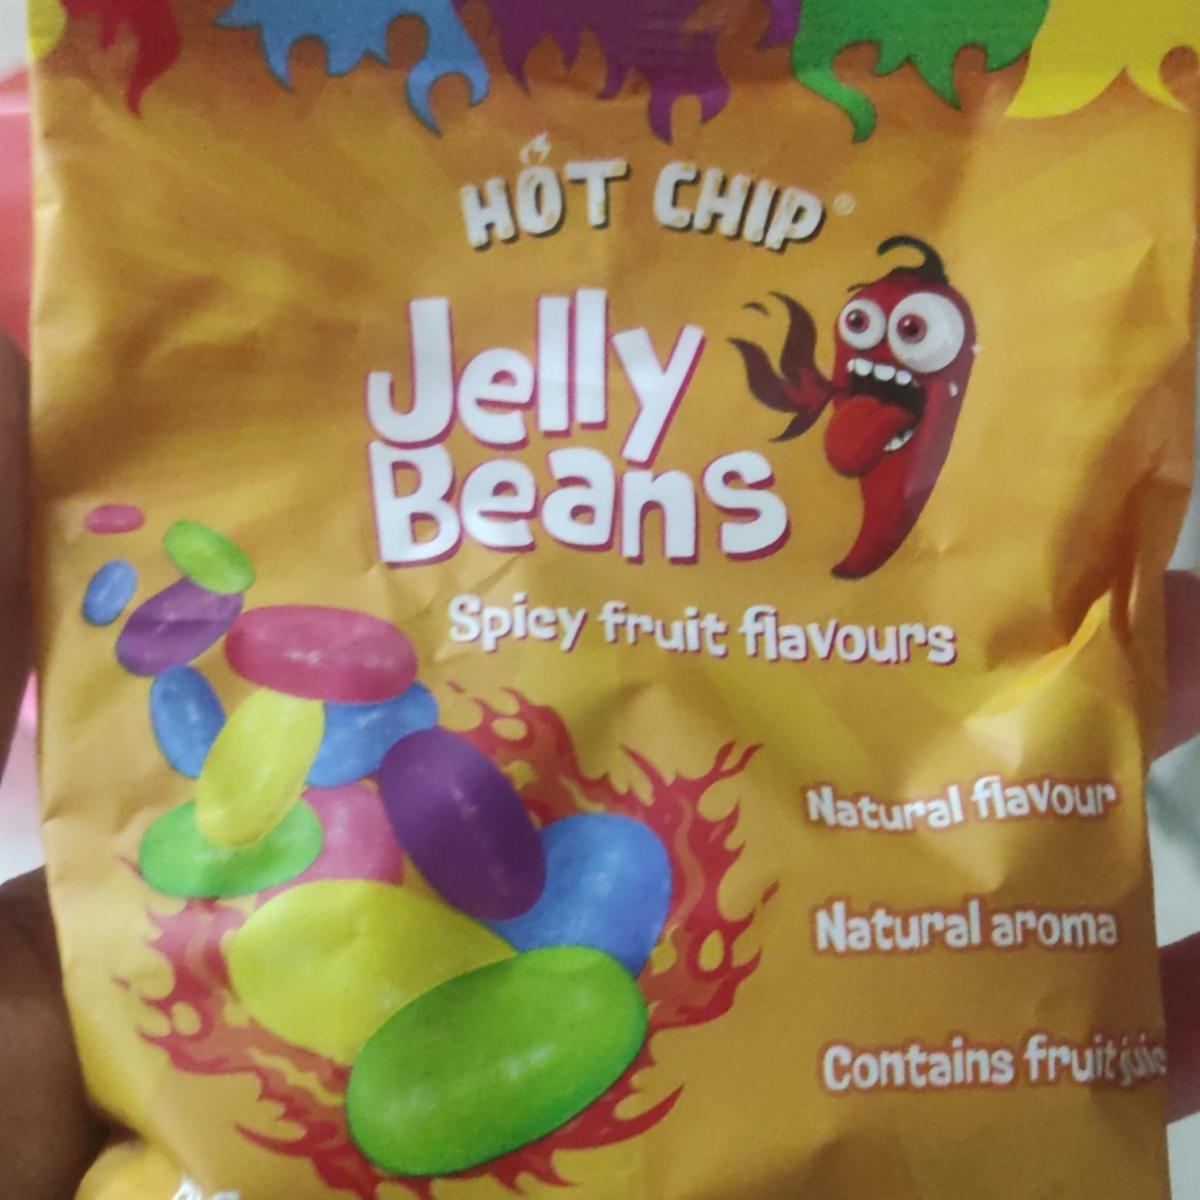 Fotografie - Jelly beans spicy fruit flavours natural flavour Hot Chip